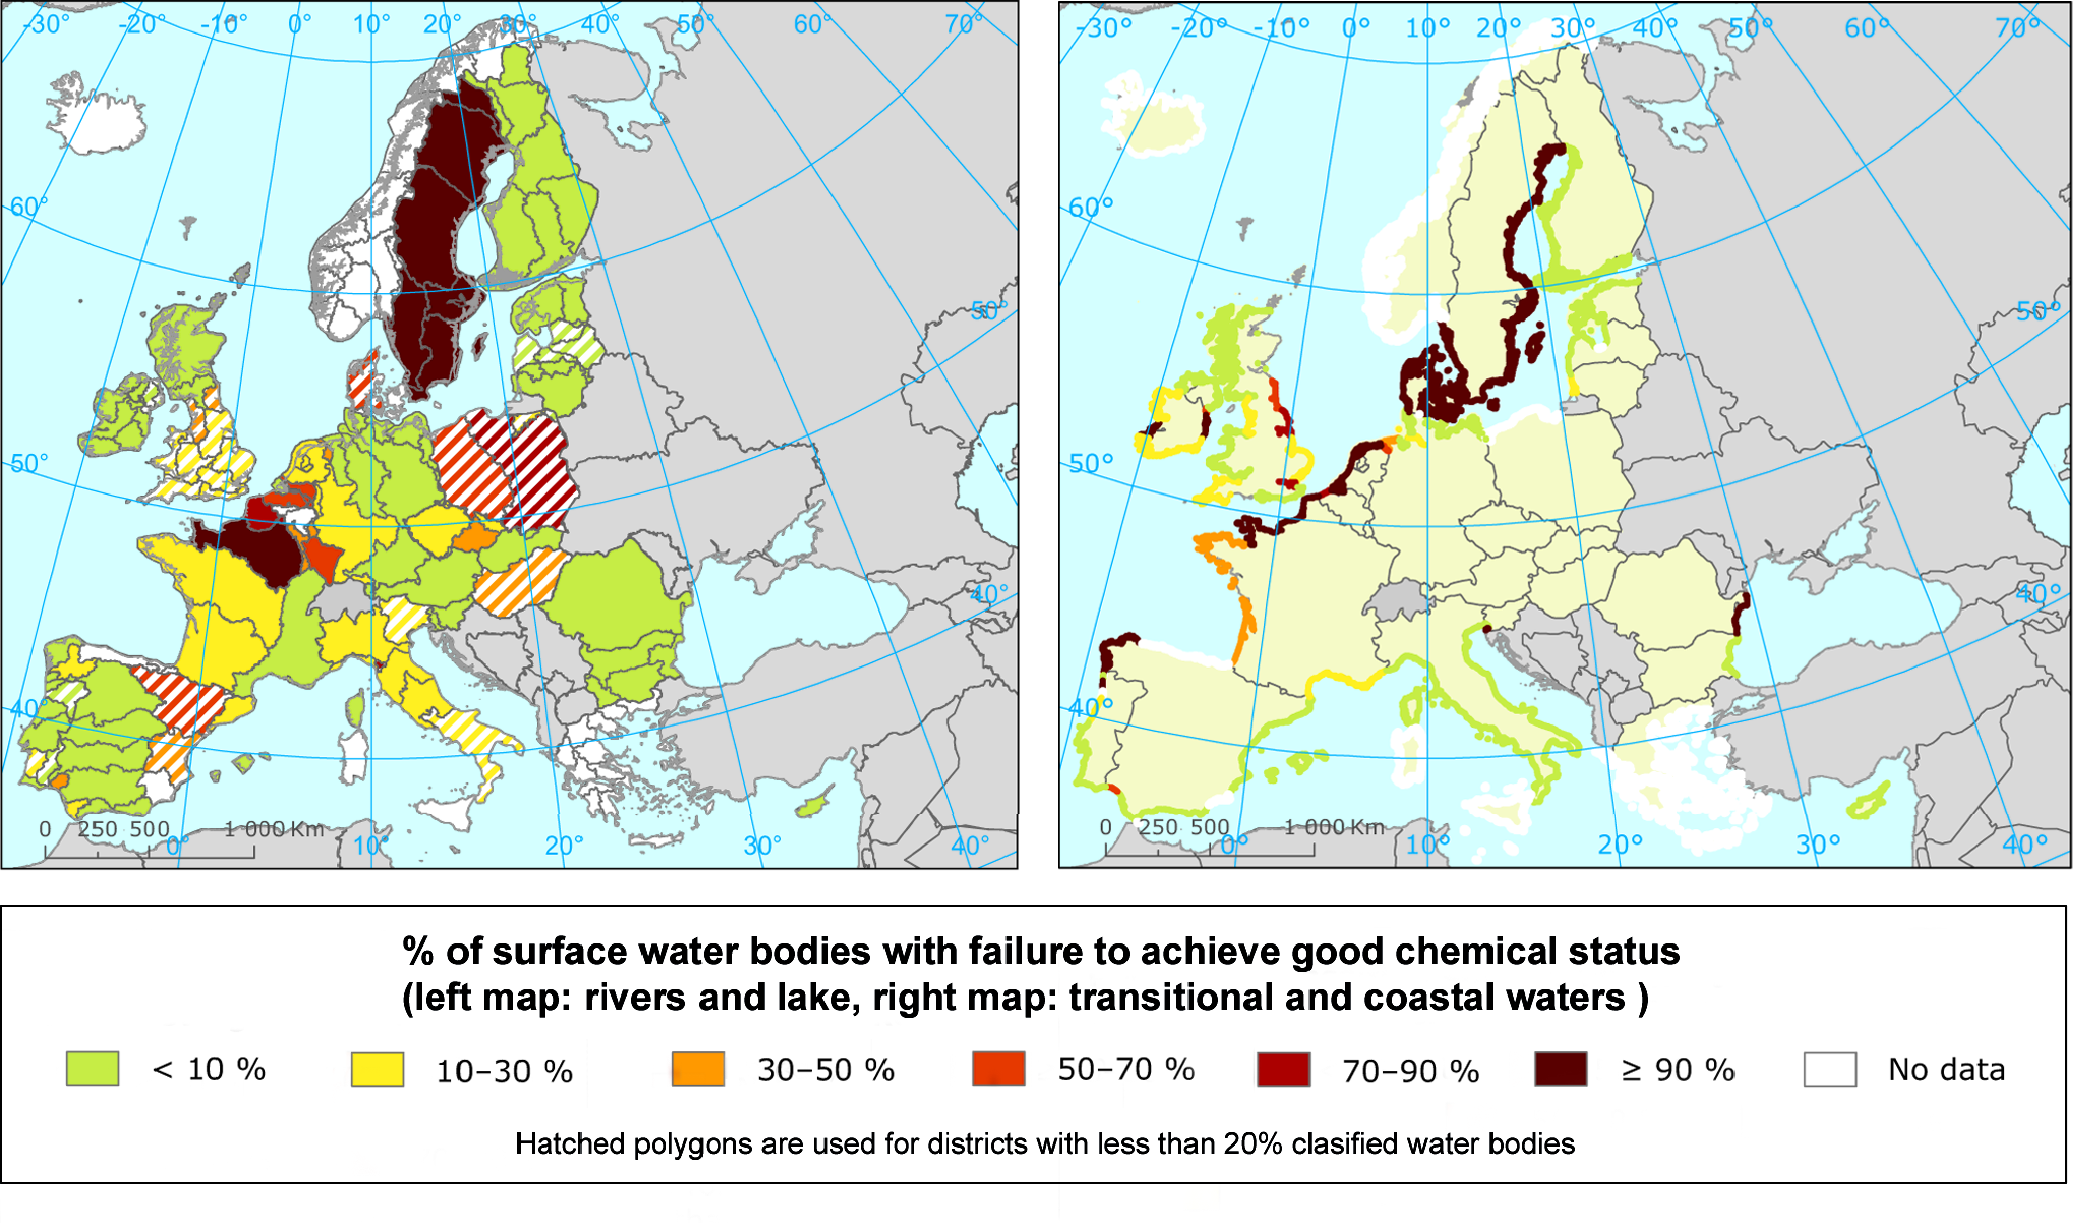 Proportion of classified surface water bodies in different River Basin Districts in poor chemical status for rivers and lakes (left panel) and for coastal and transitional waters (right panel) 